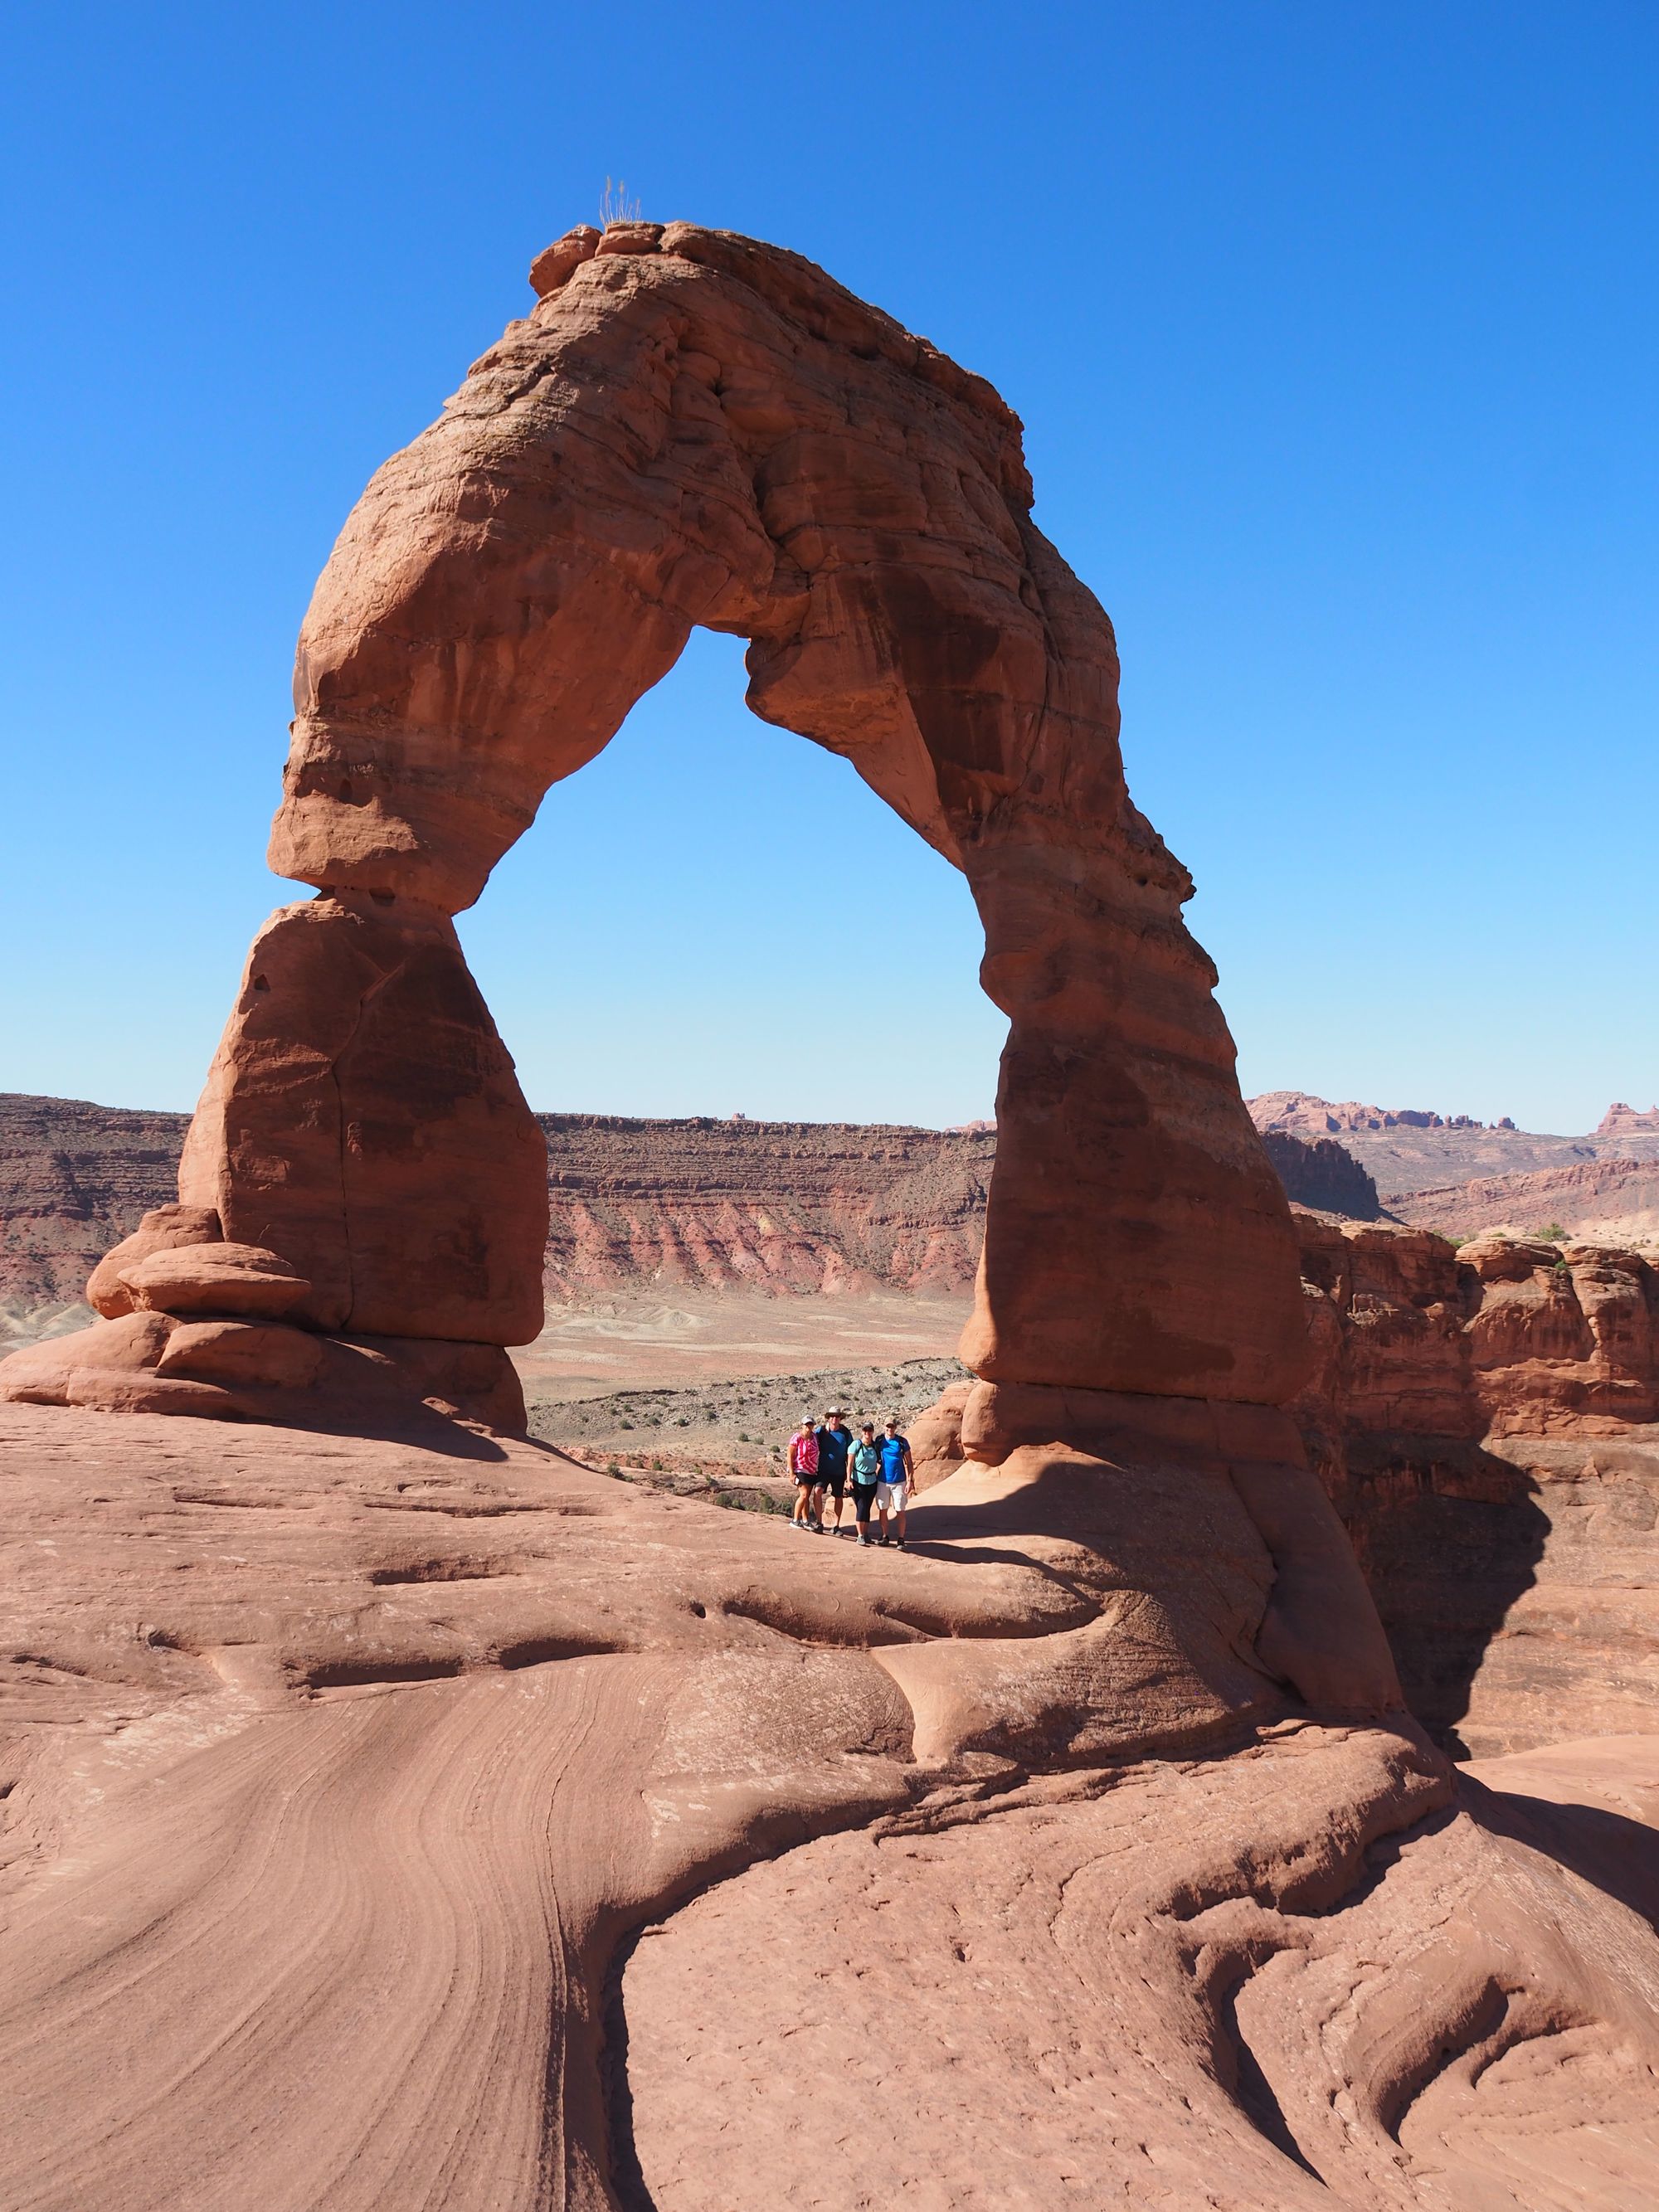 Standing under the massive Delicate Arch in Arches National Park